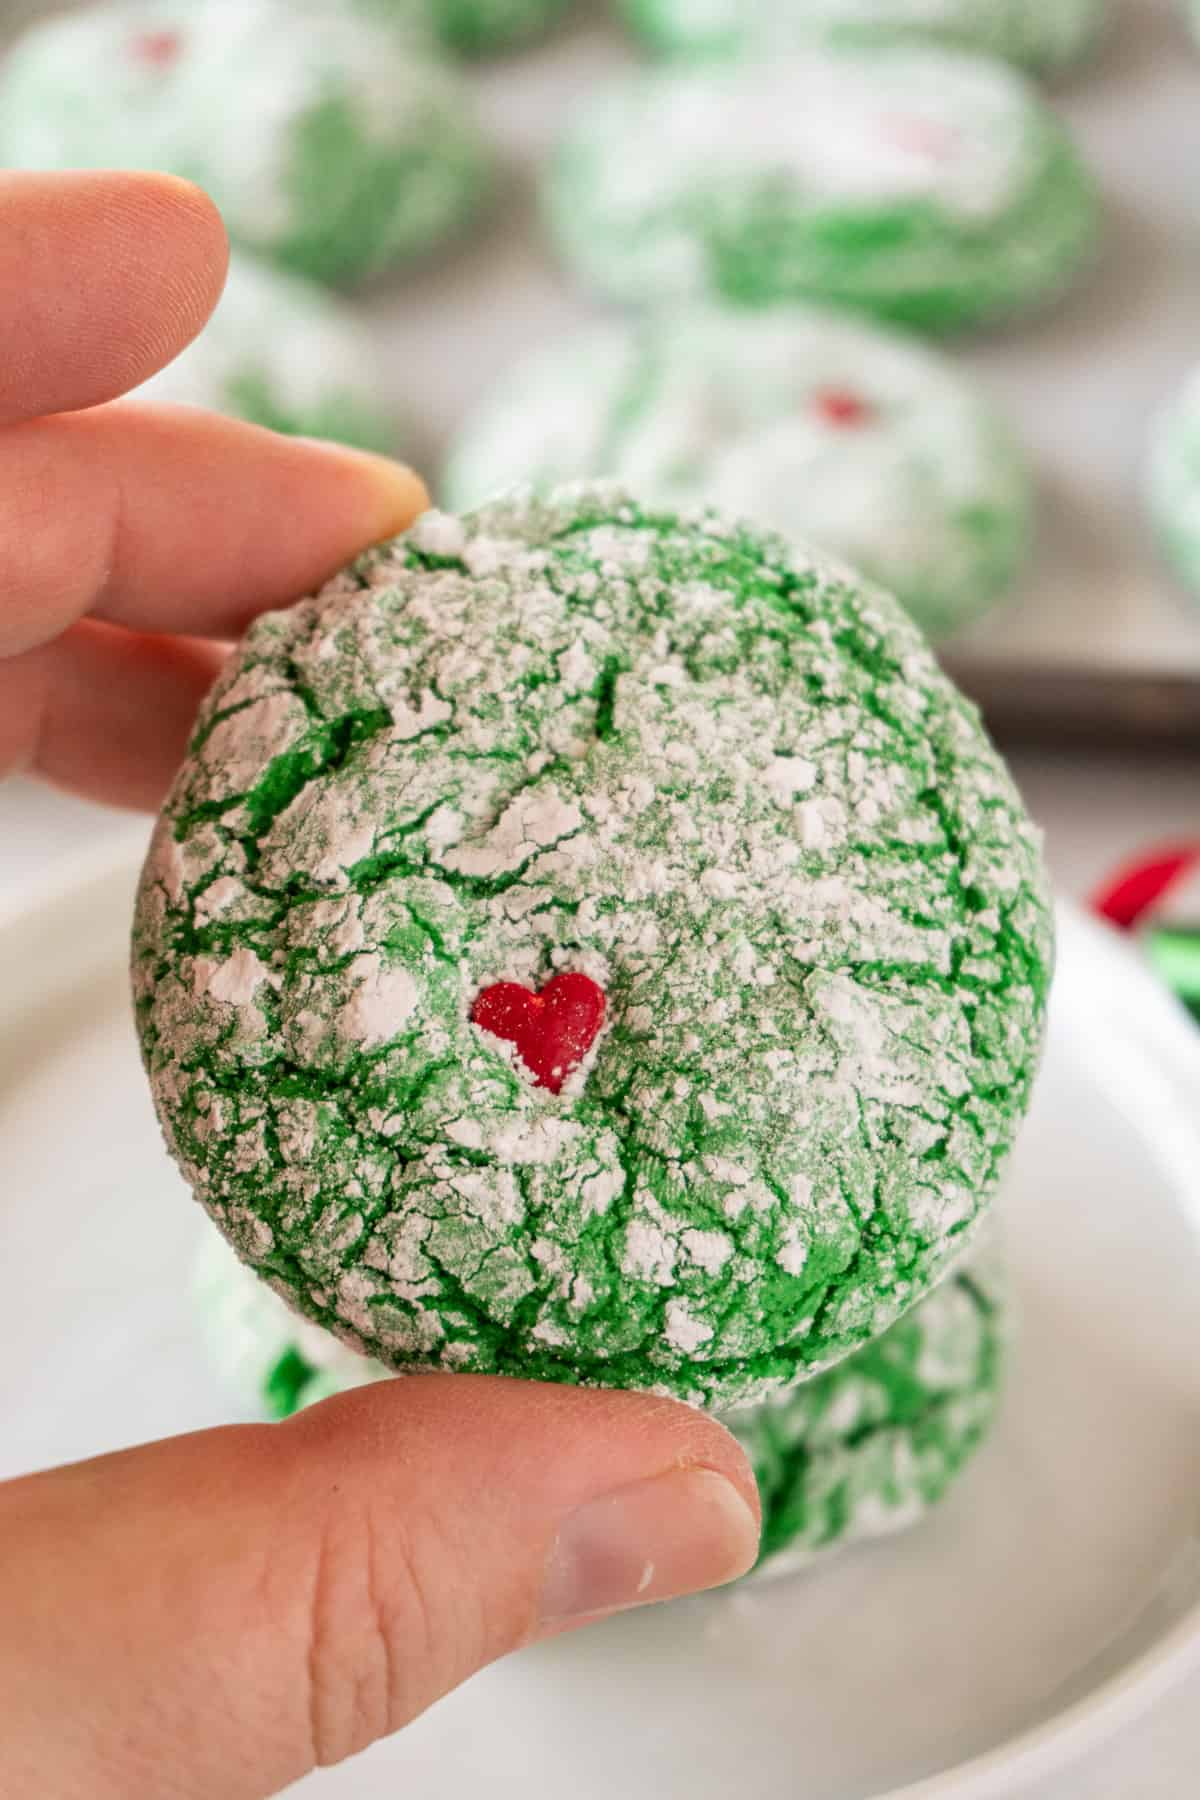 holding a Grinch Cookie in hand